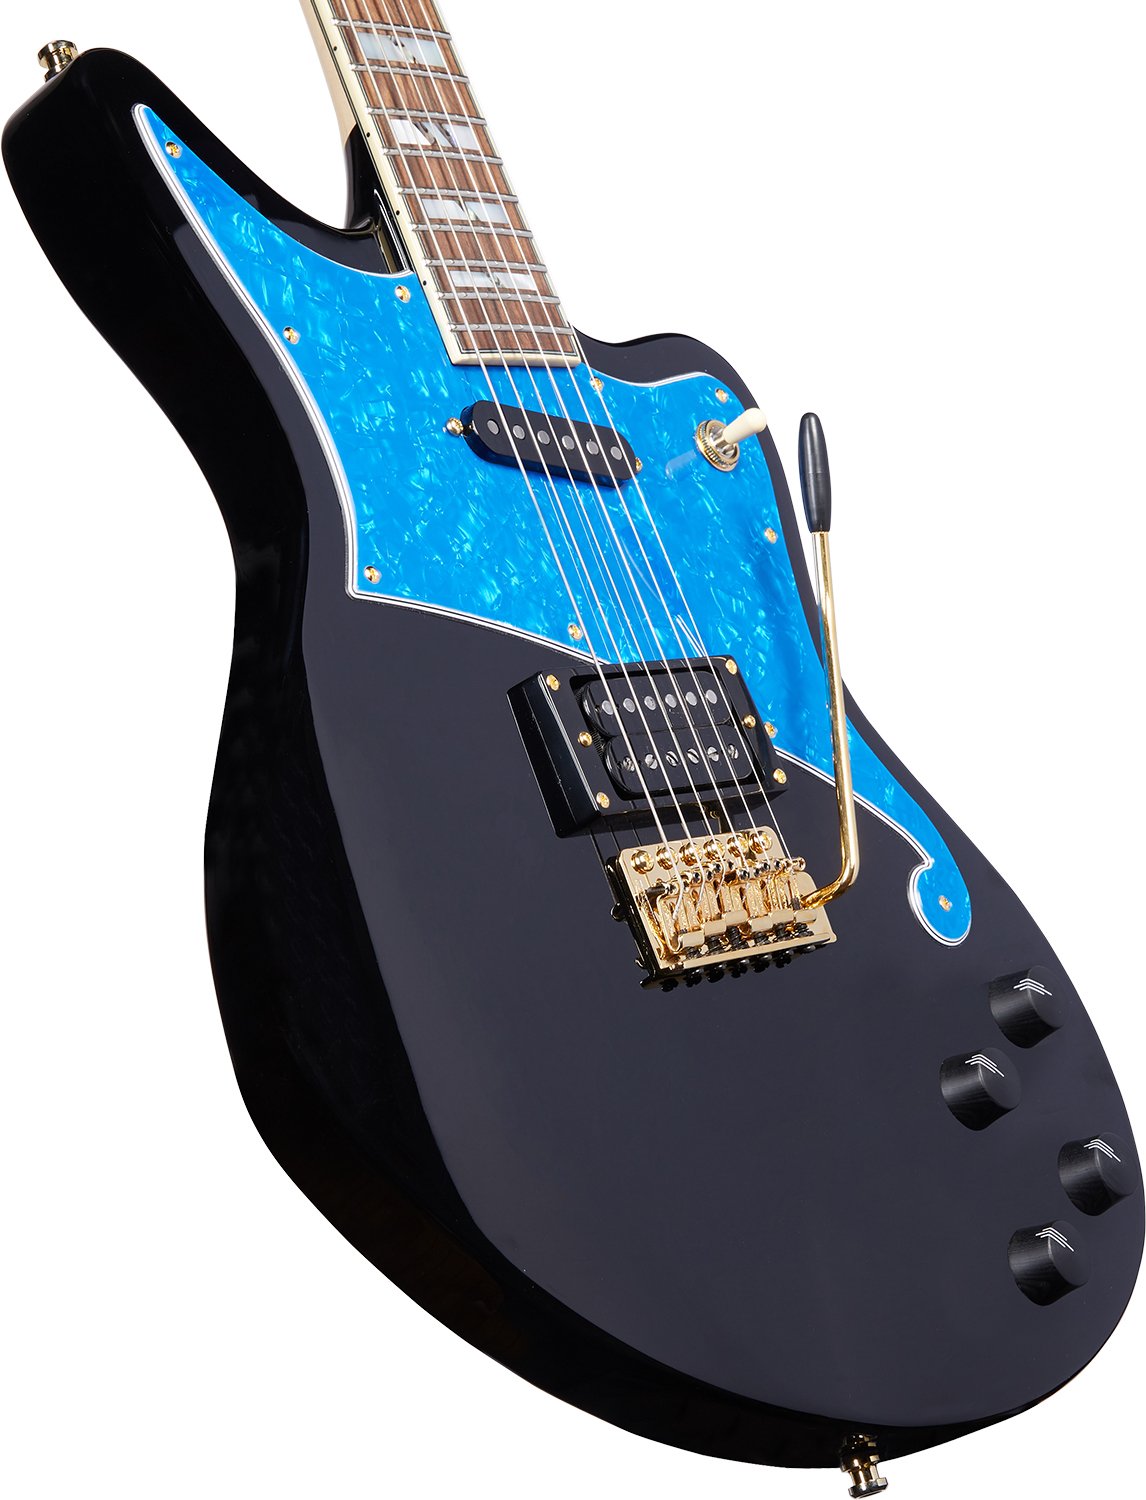 Deluxe Bedford Black with Blue Pearl Pickguard and Tremolo bodyup